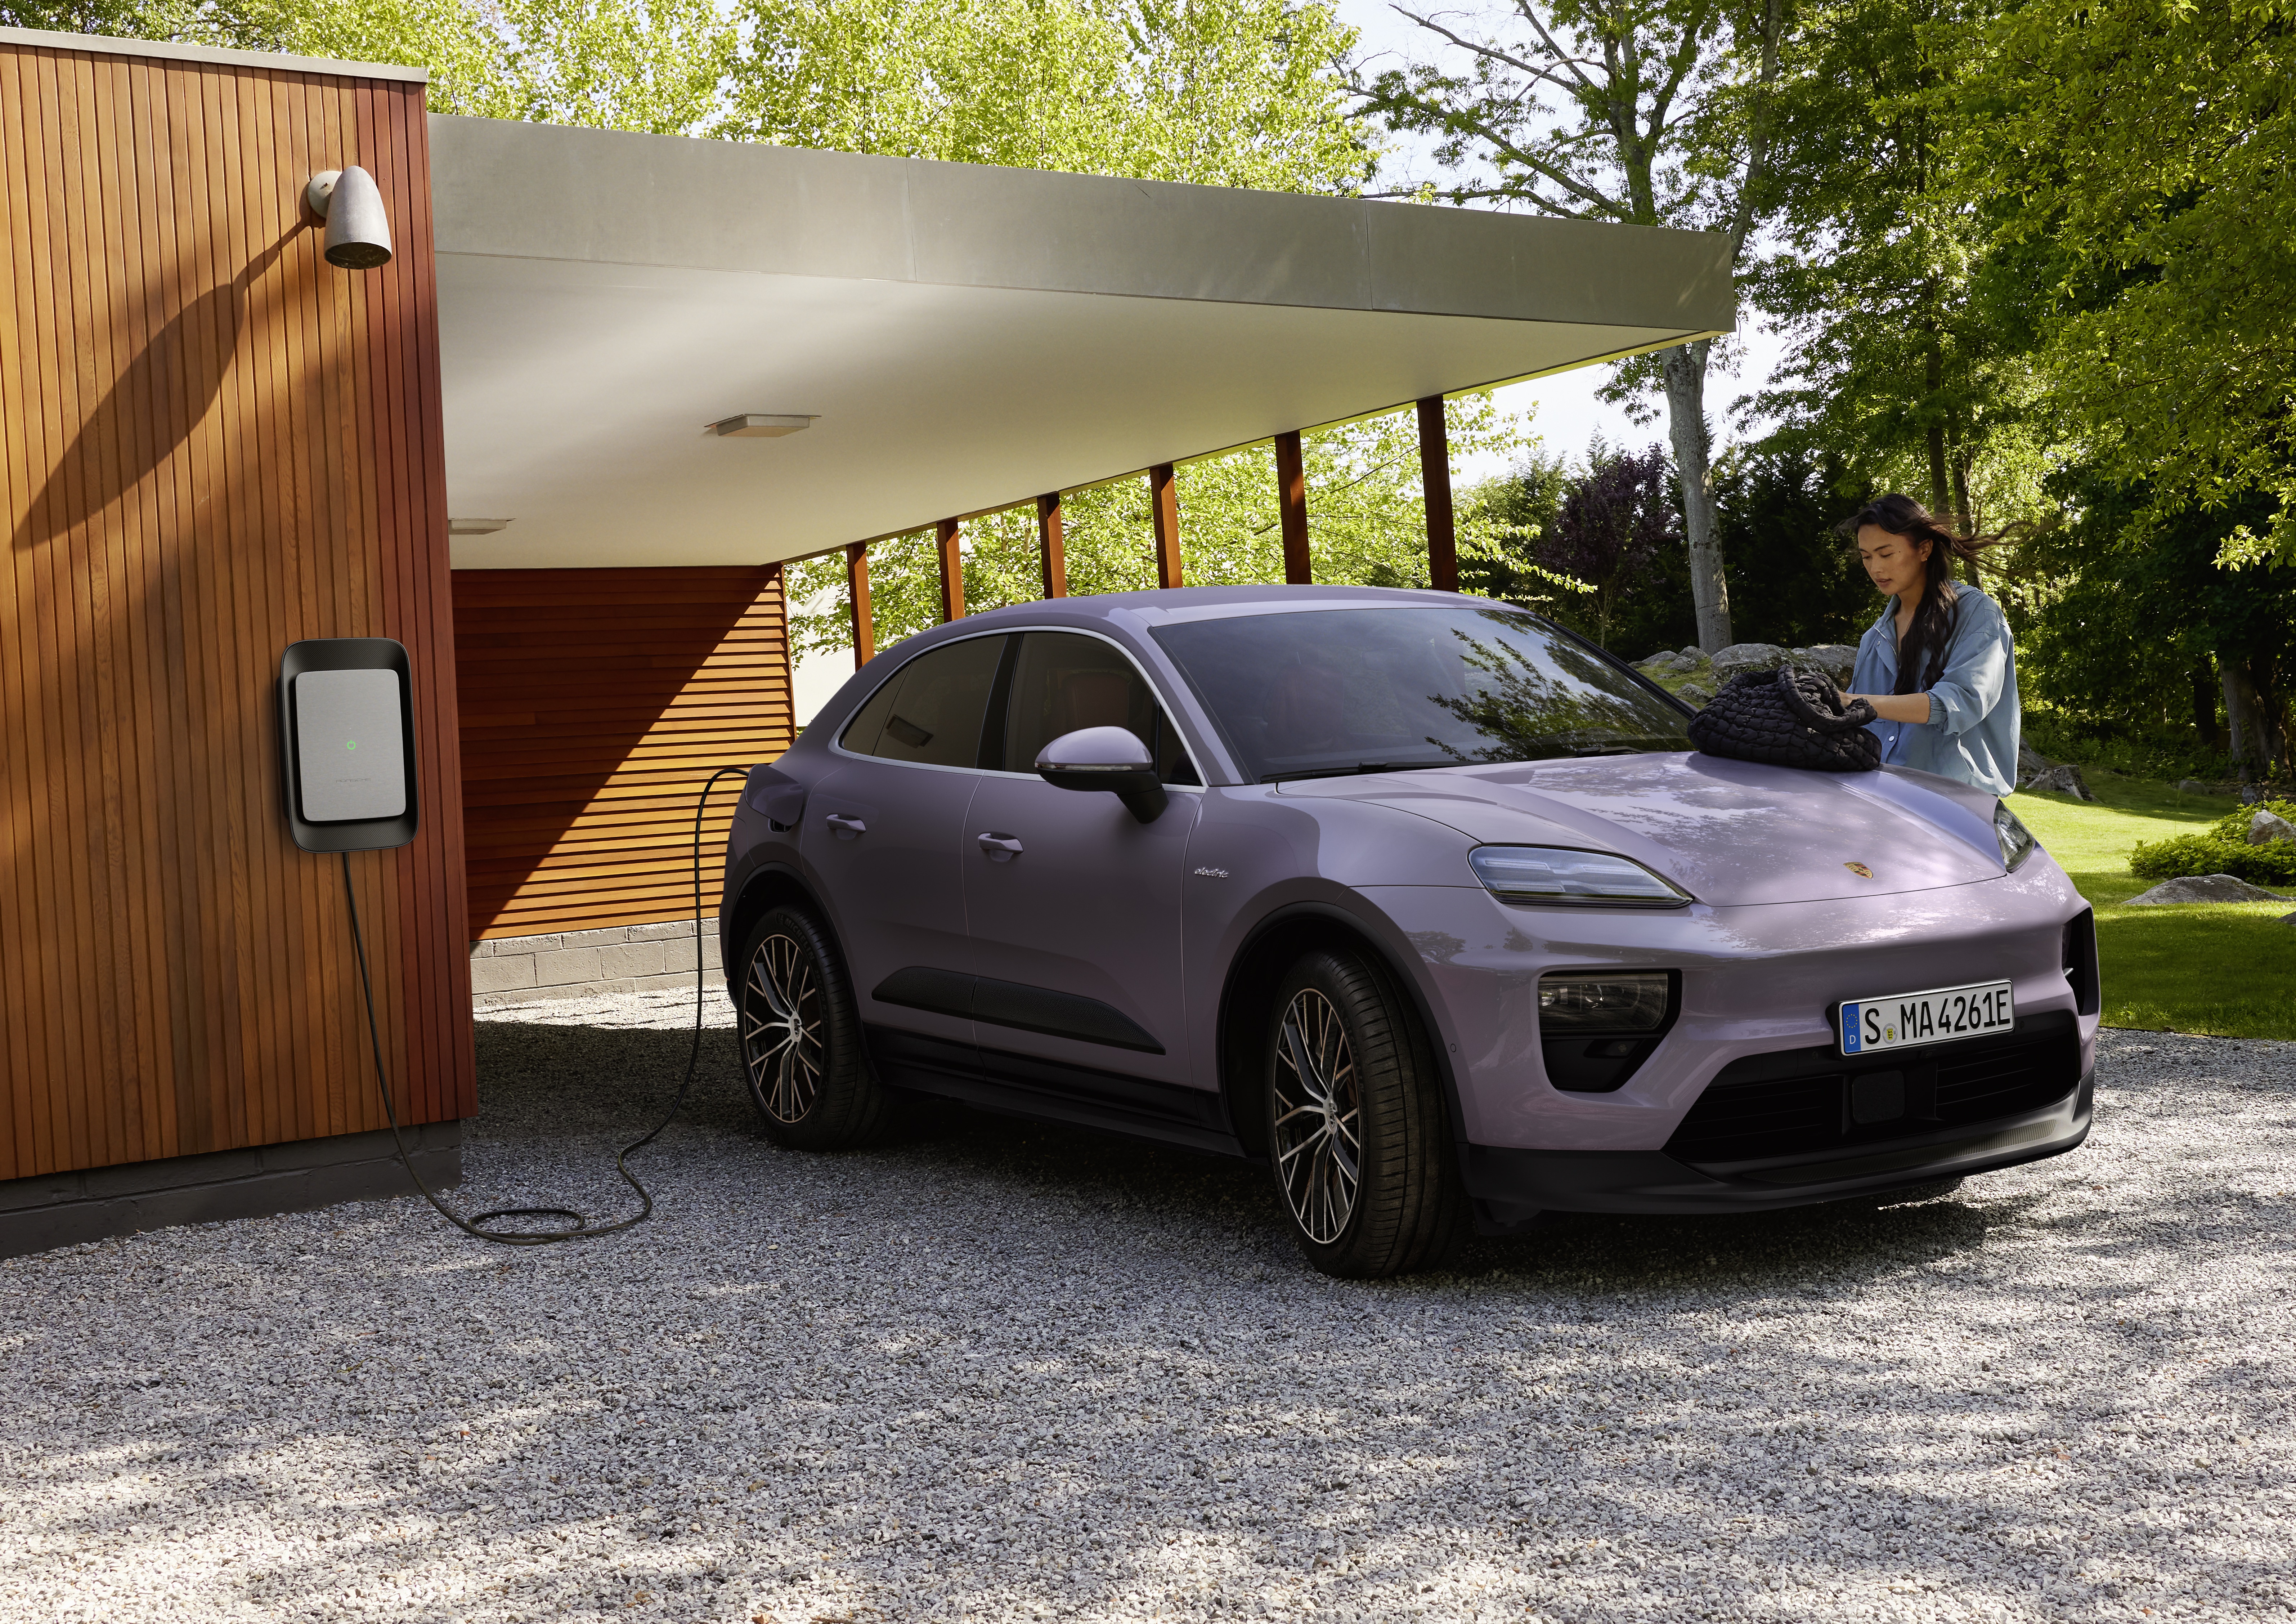 Electric Porsche Macan 4 in Provence colour charging at house